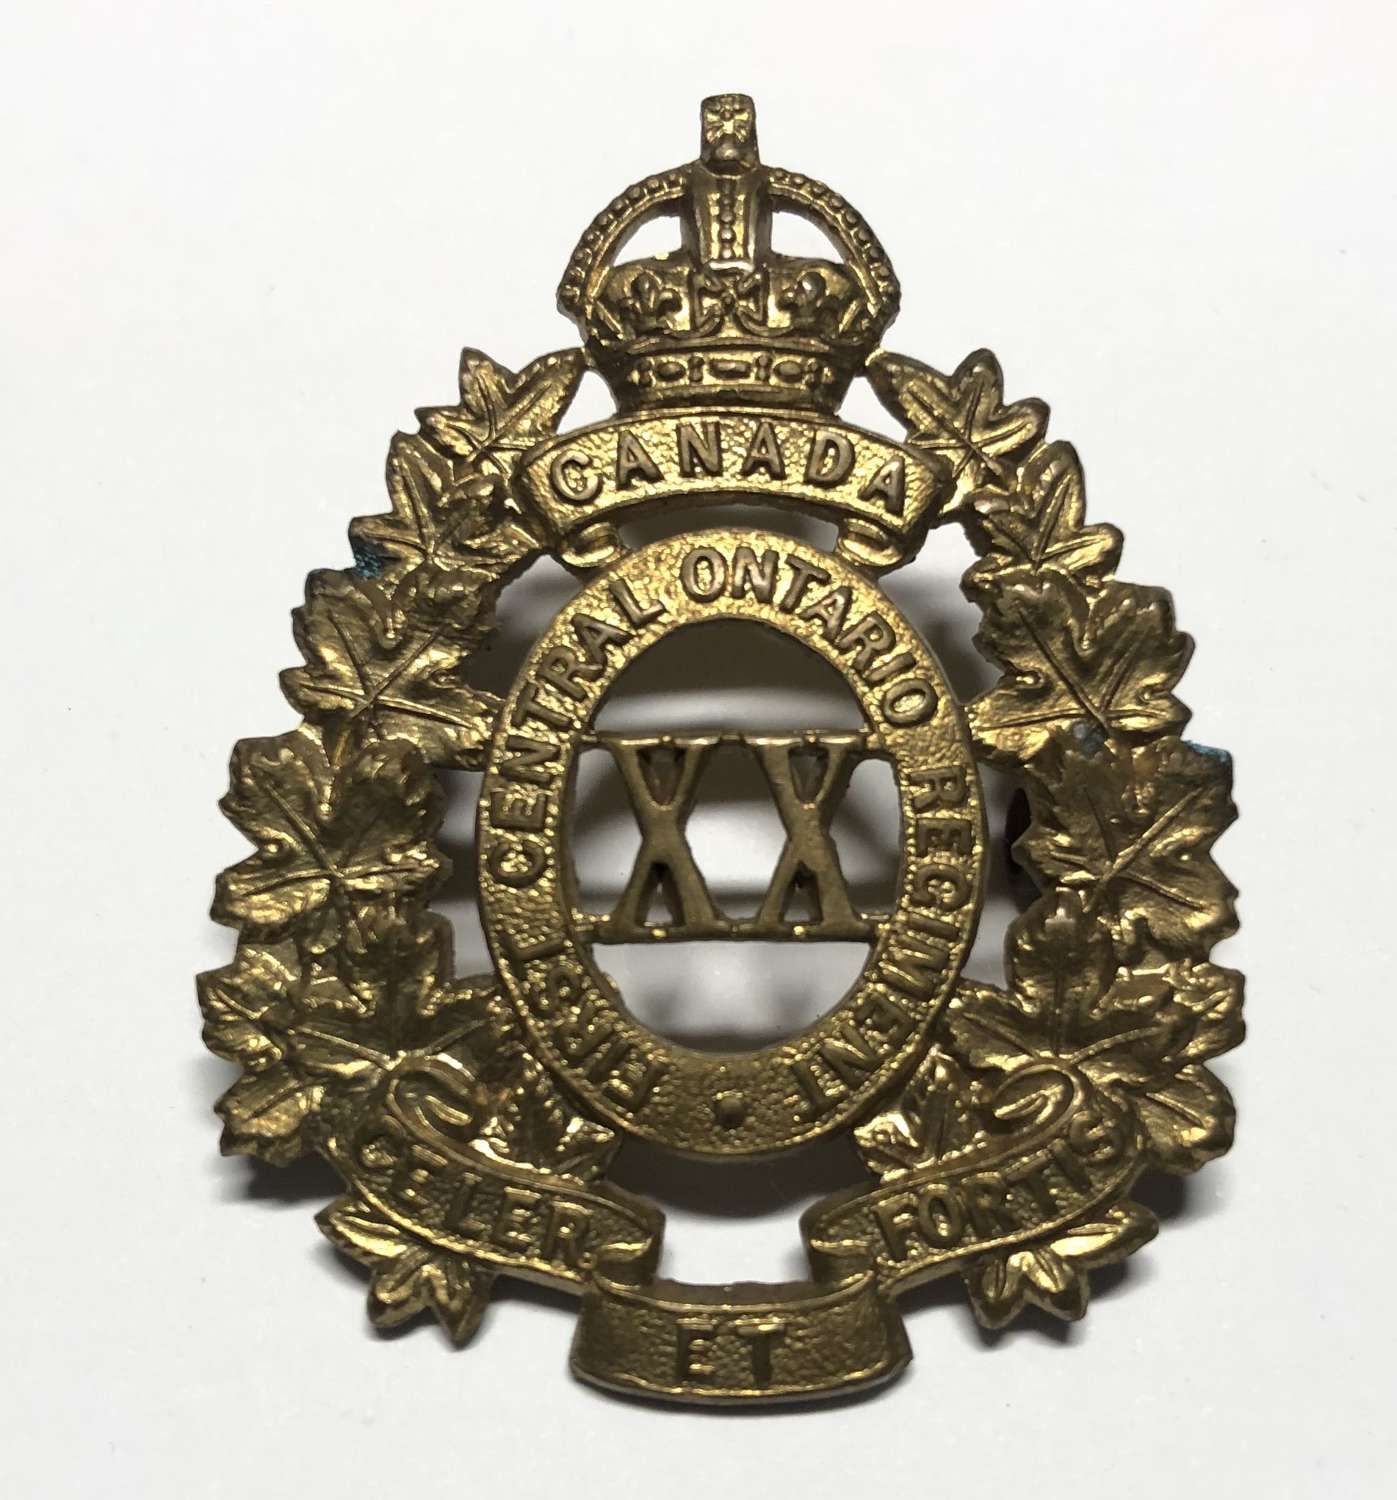 Canadian. 20th (1st Central Ontario) Infantry Bn. CEF WW1 cap badge